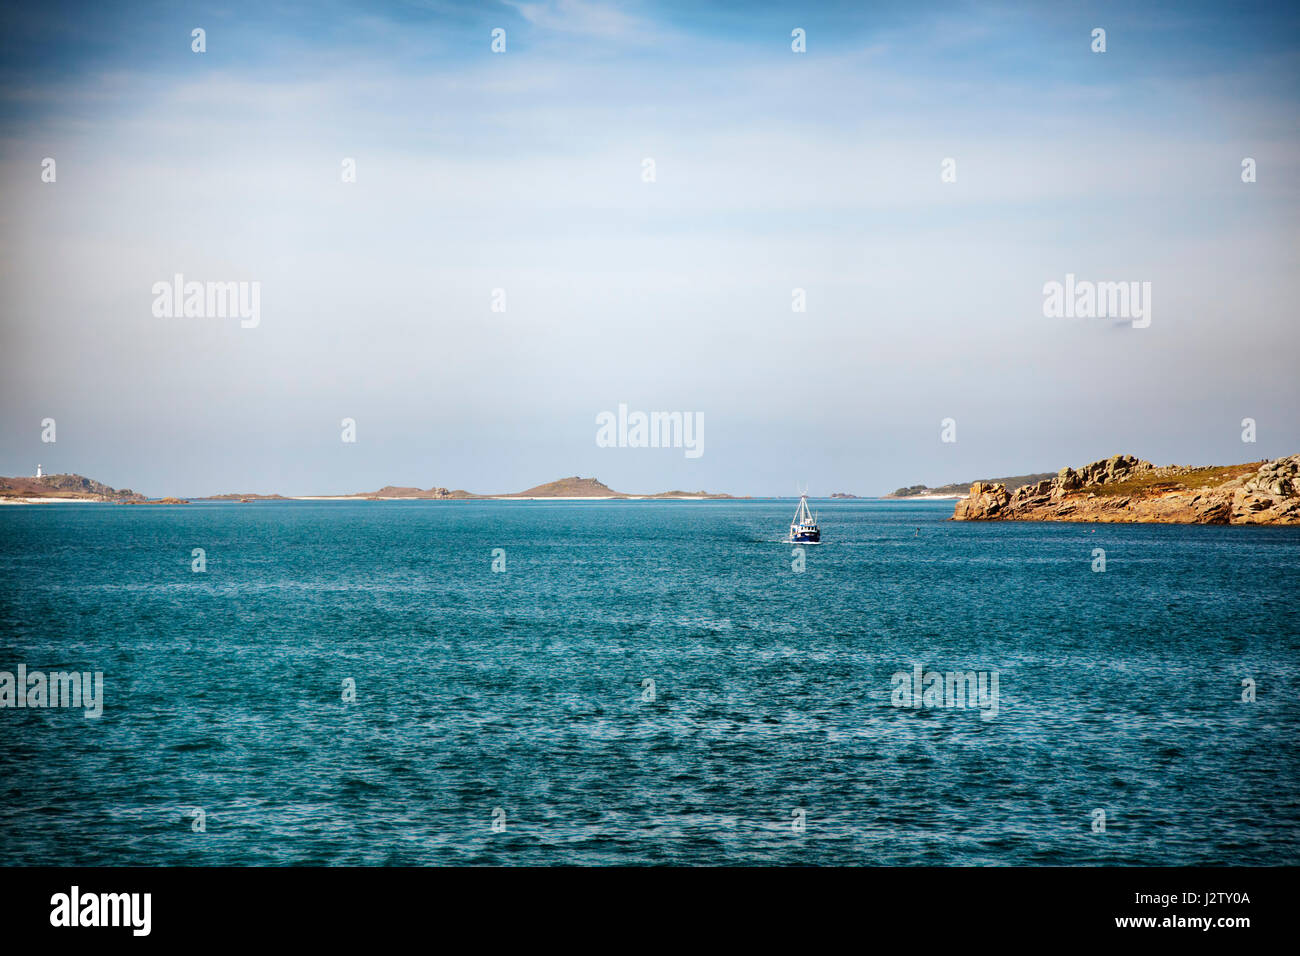 St Agnes Isles of Scilly uk Stockfoto